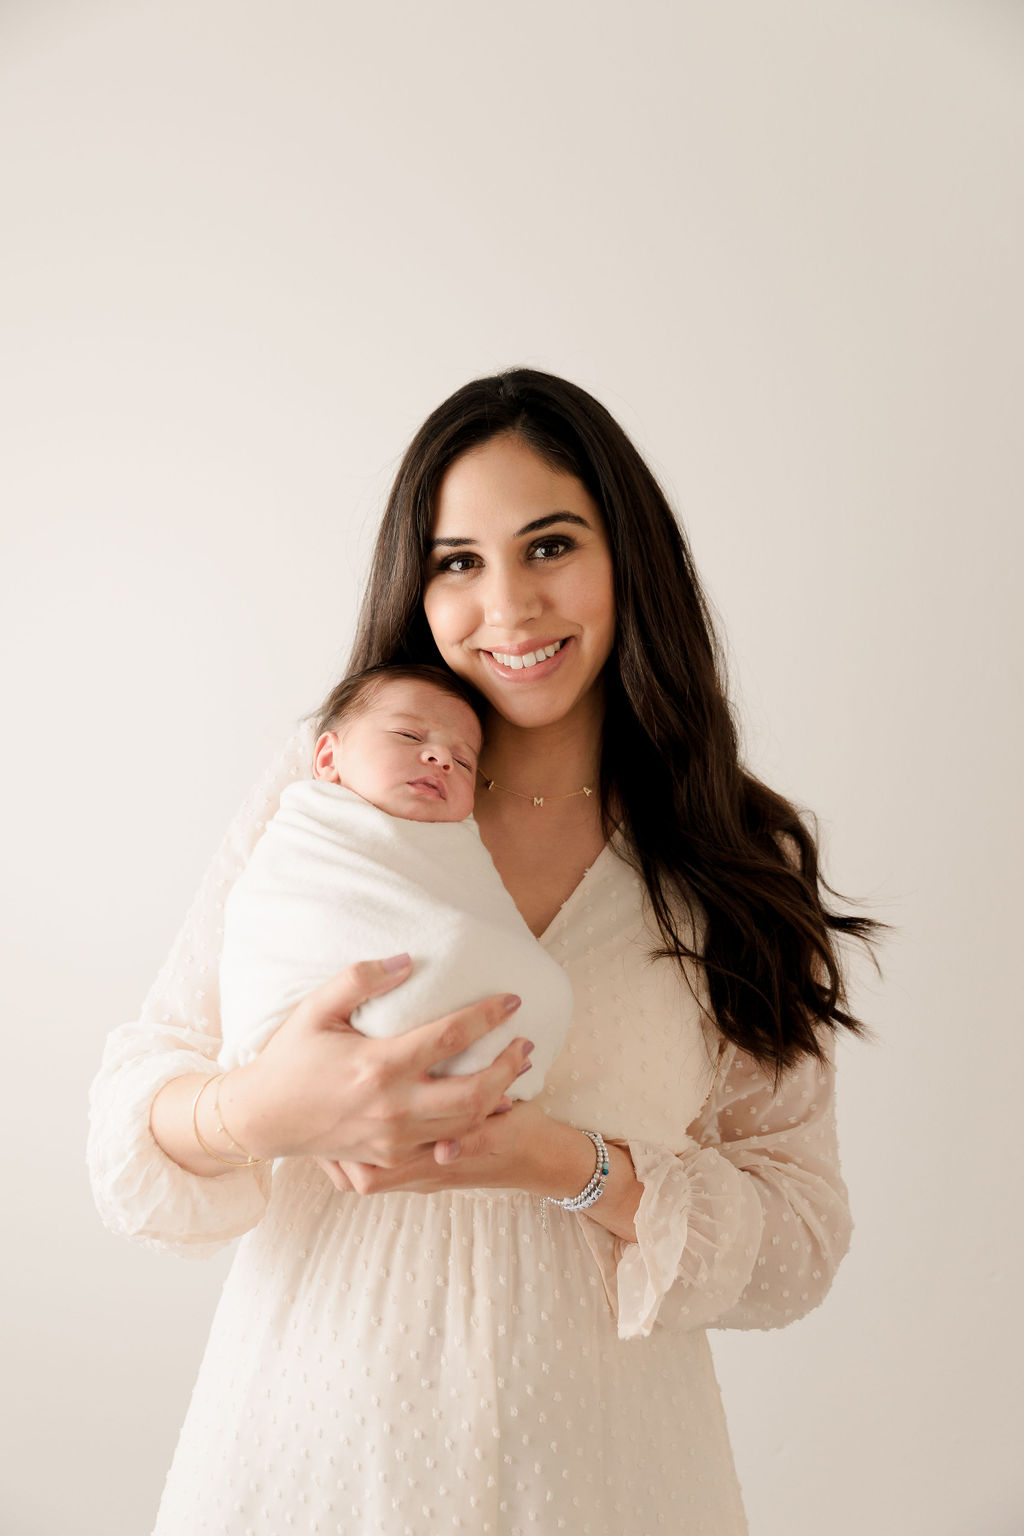 A mother stands in a studio in a white dress holding her sleeping newborn baby